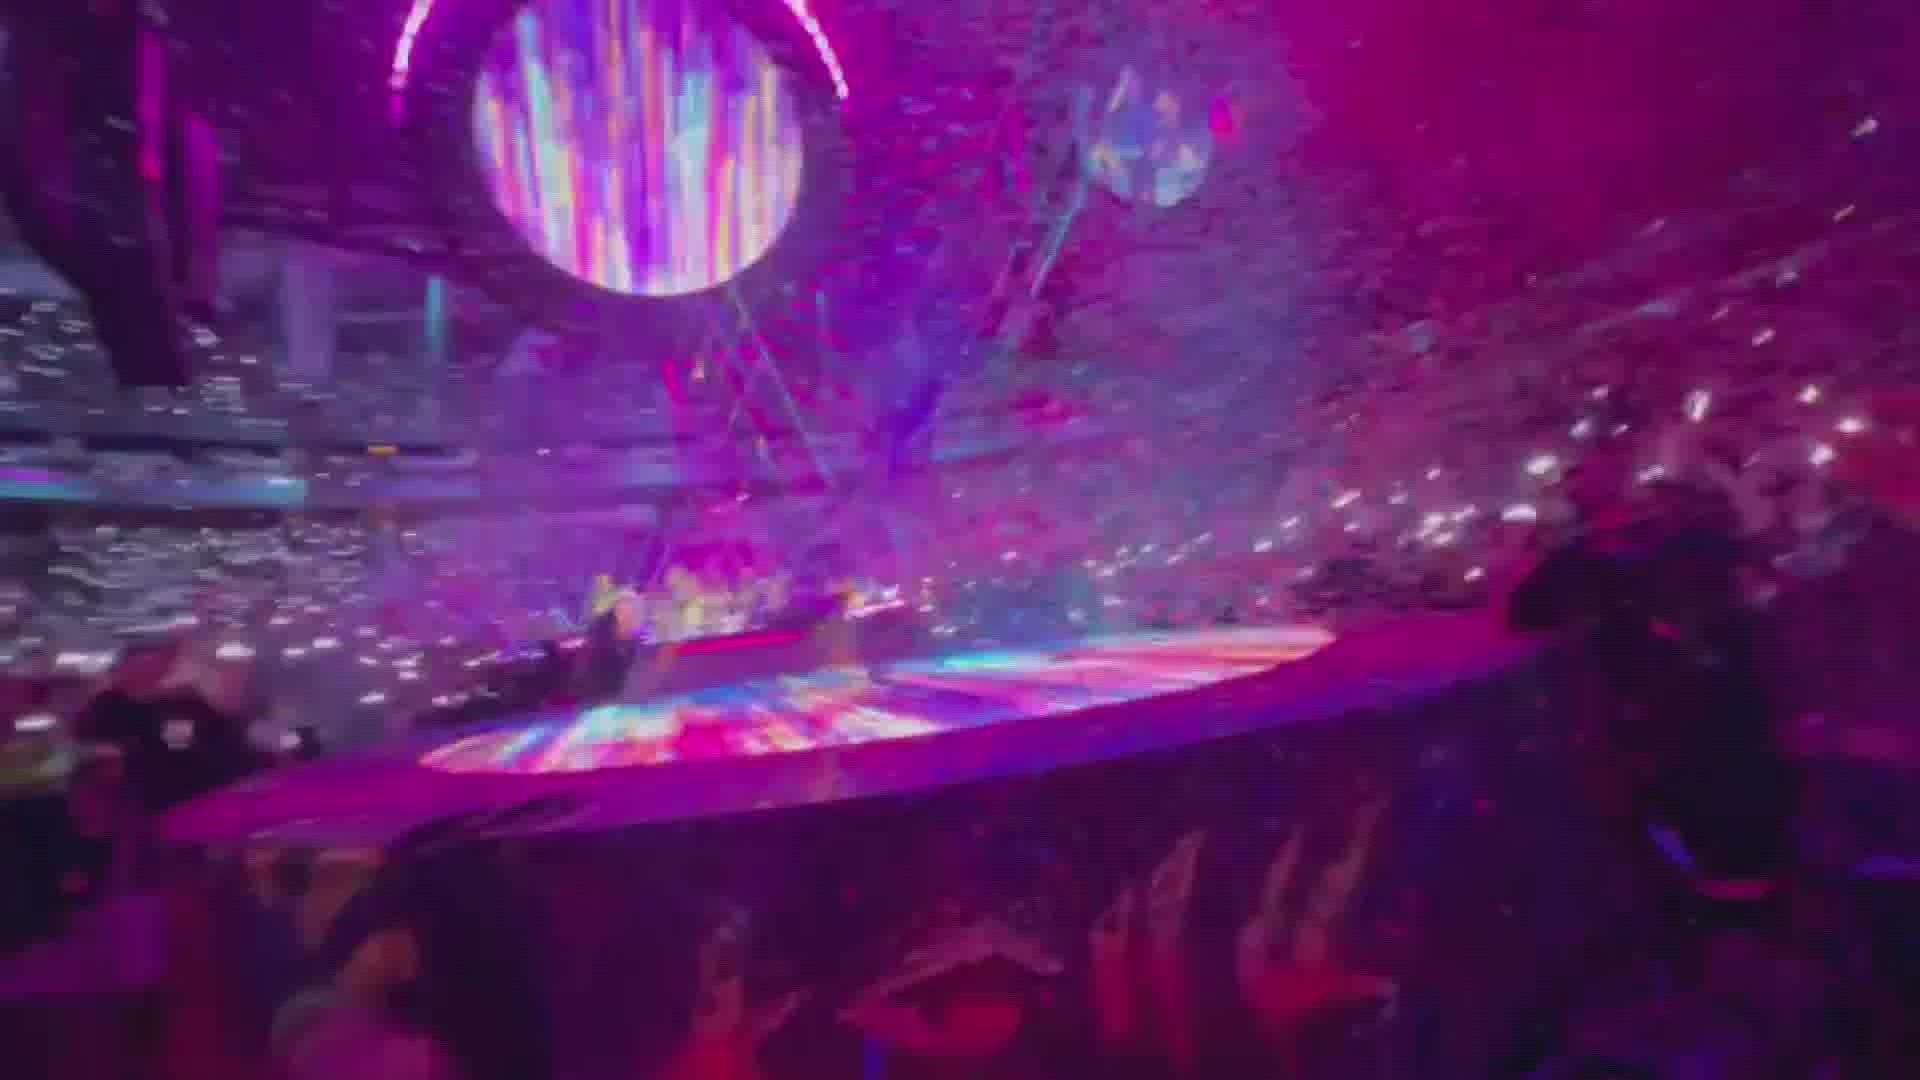 Coldplay performed the Grand Opening concert at Seattle's Climate Pledge Arena on Oct. 22, 2021.